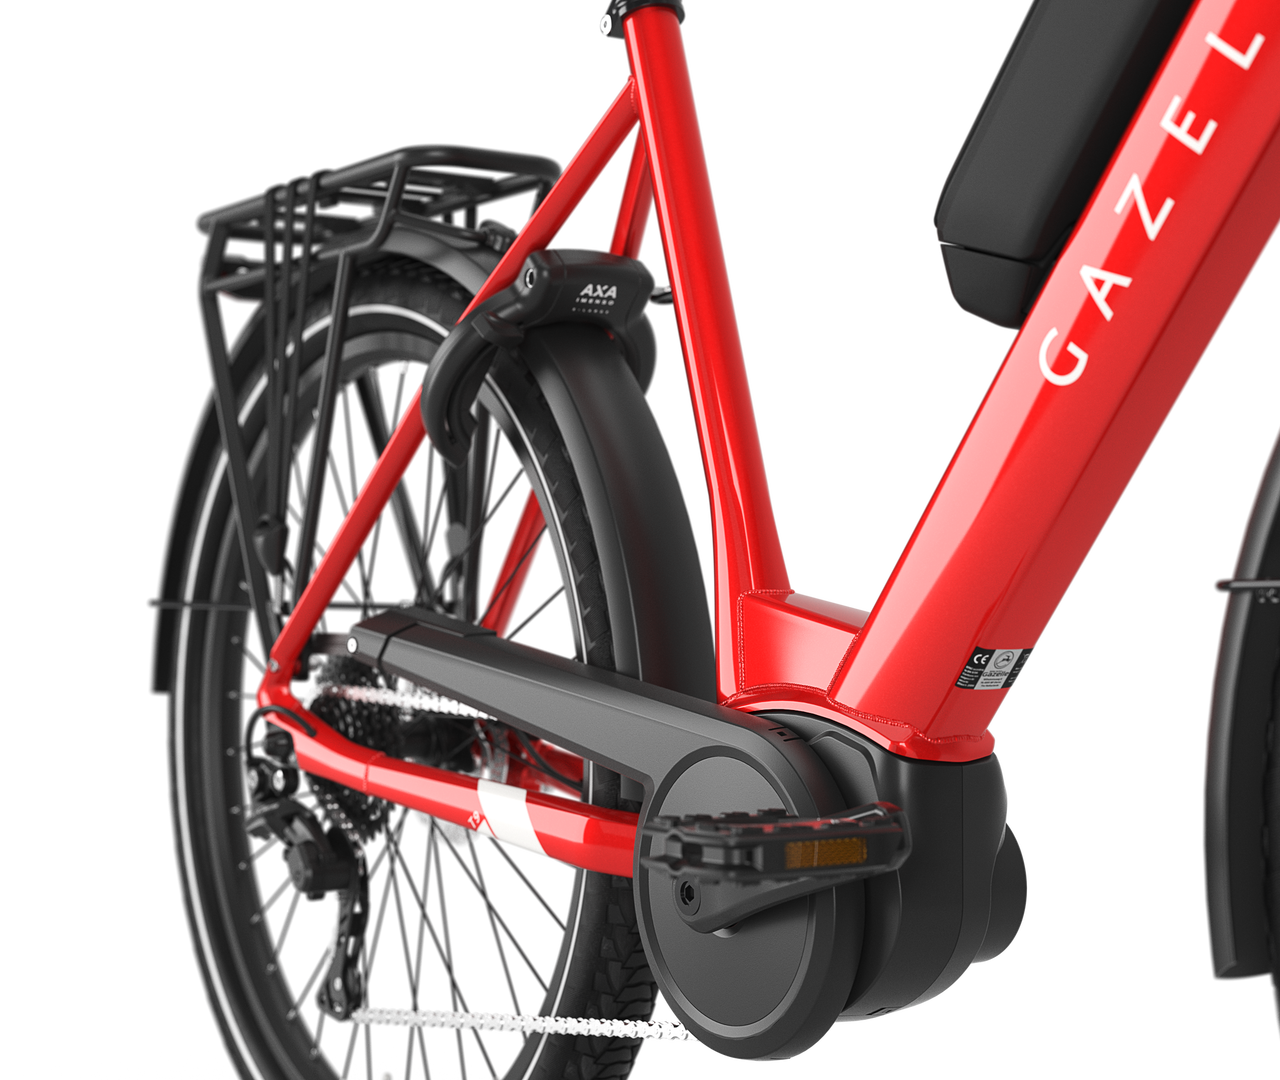 Hit the road with confidence Gazelle Medeo T9 HMB E-bike low-step champion red